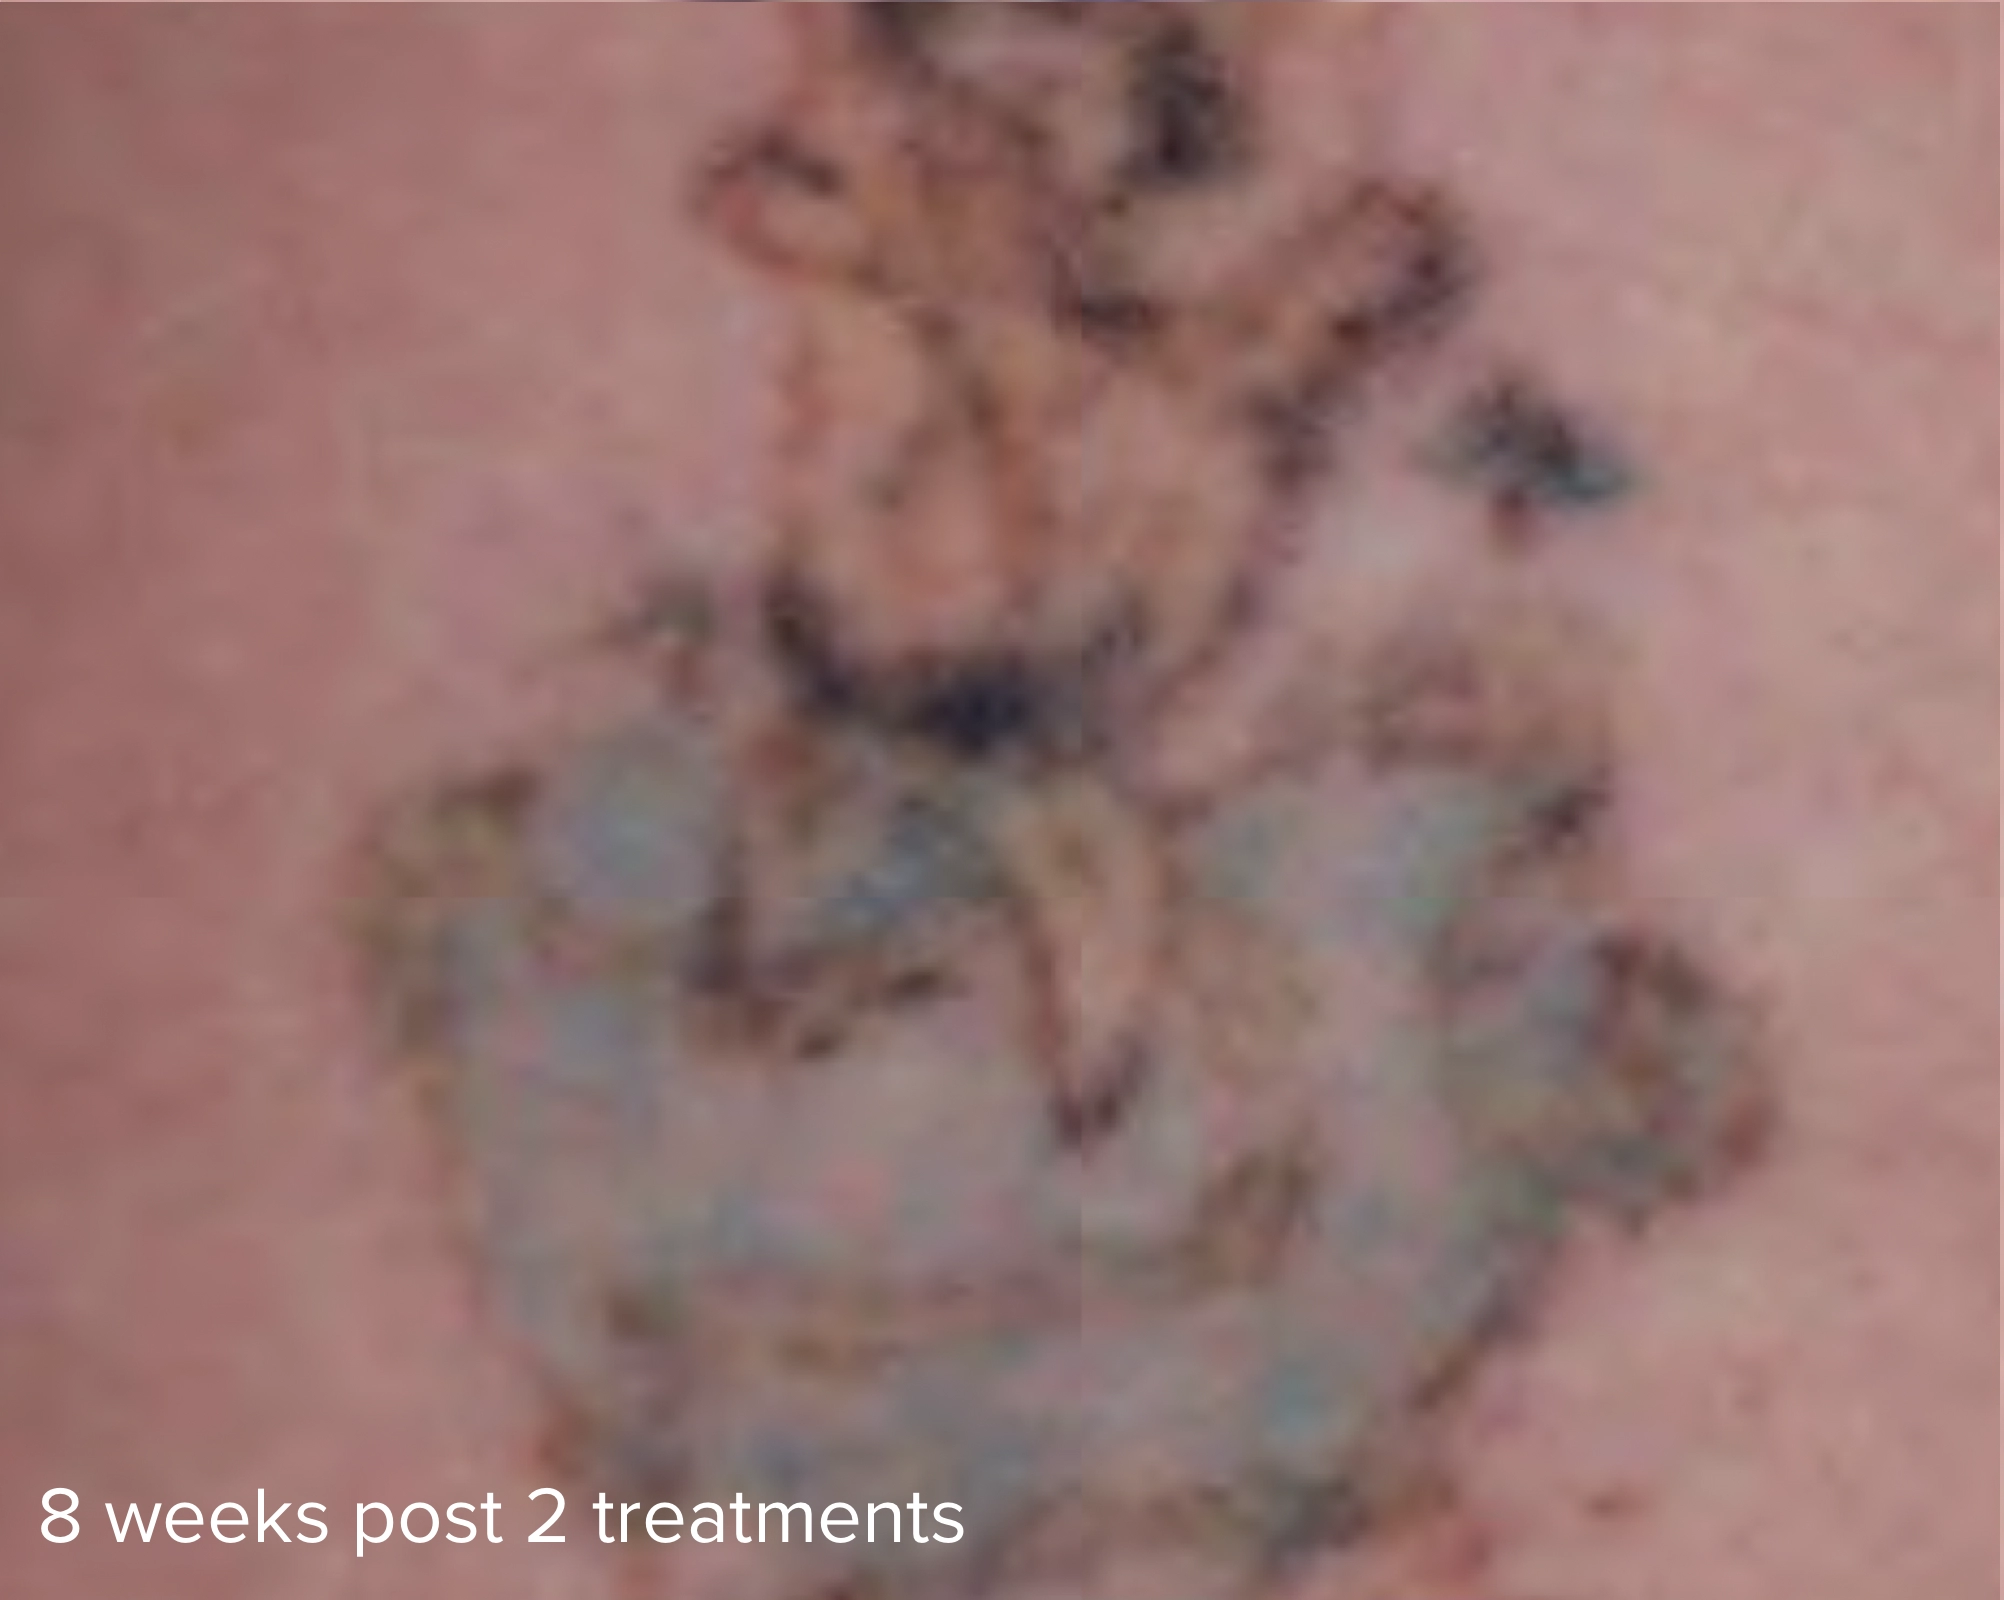 Multicolored Tattoo Removal 785nm 8 Weeks Post 2 treatments